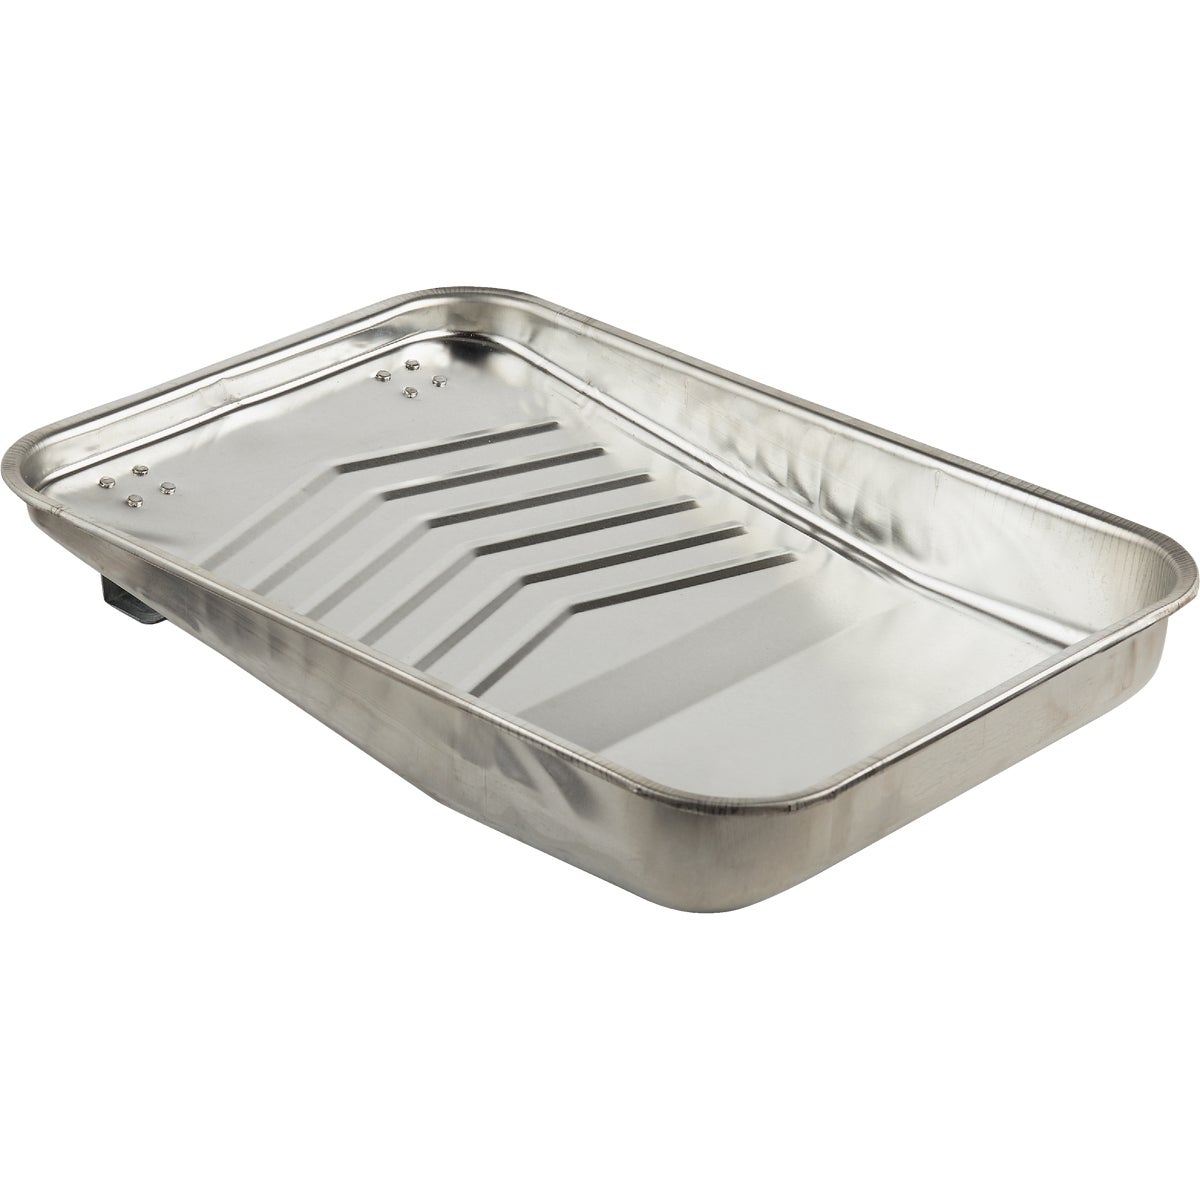 Item 772344, Quart metal paint tray with ladder lock grips has a rolled edge.